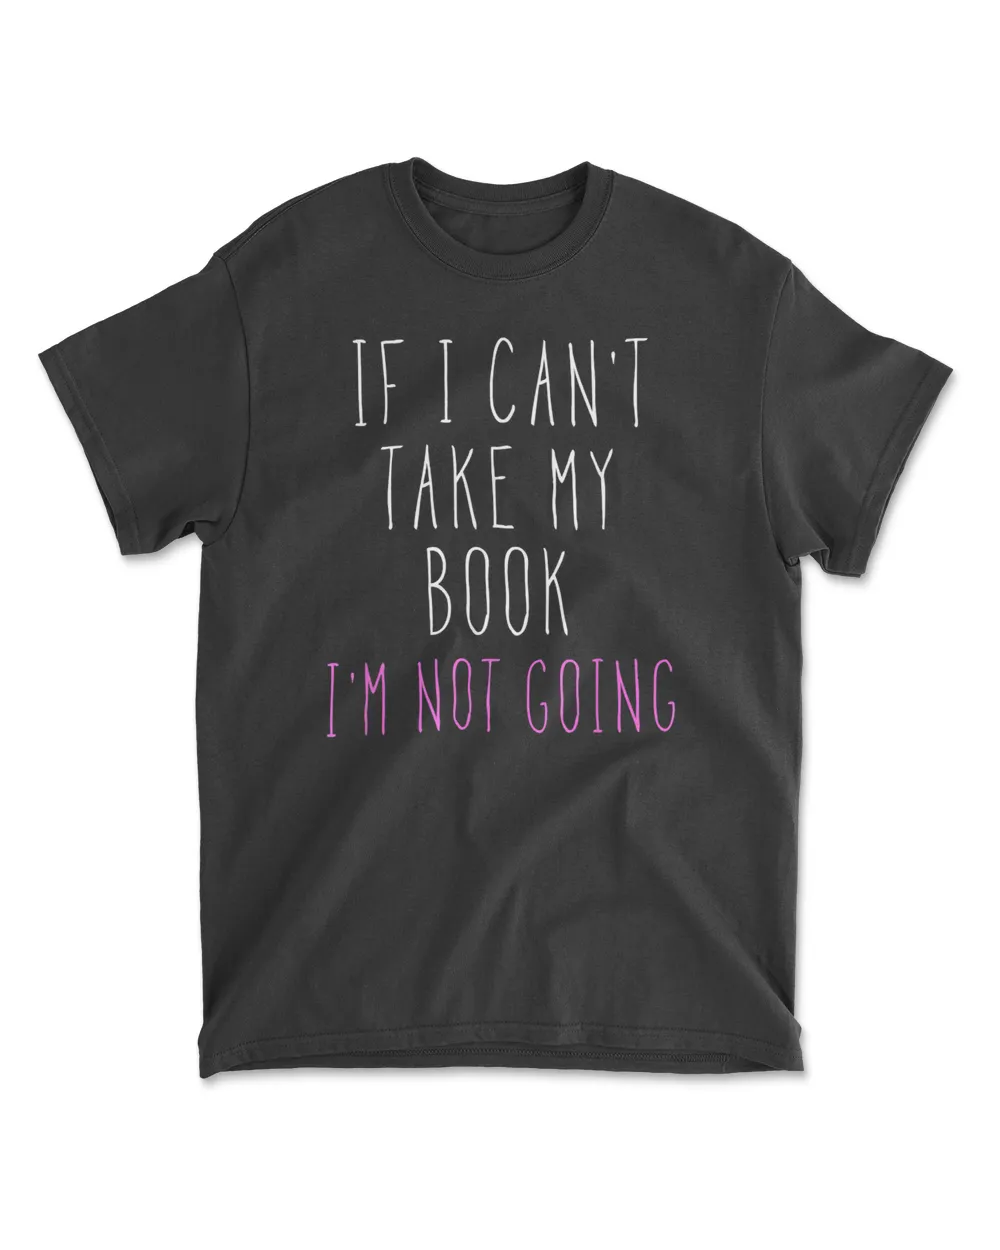 If I Can't Take My Book I'm Not Going T-Shirt